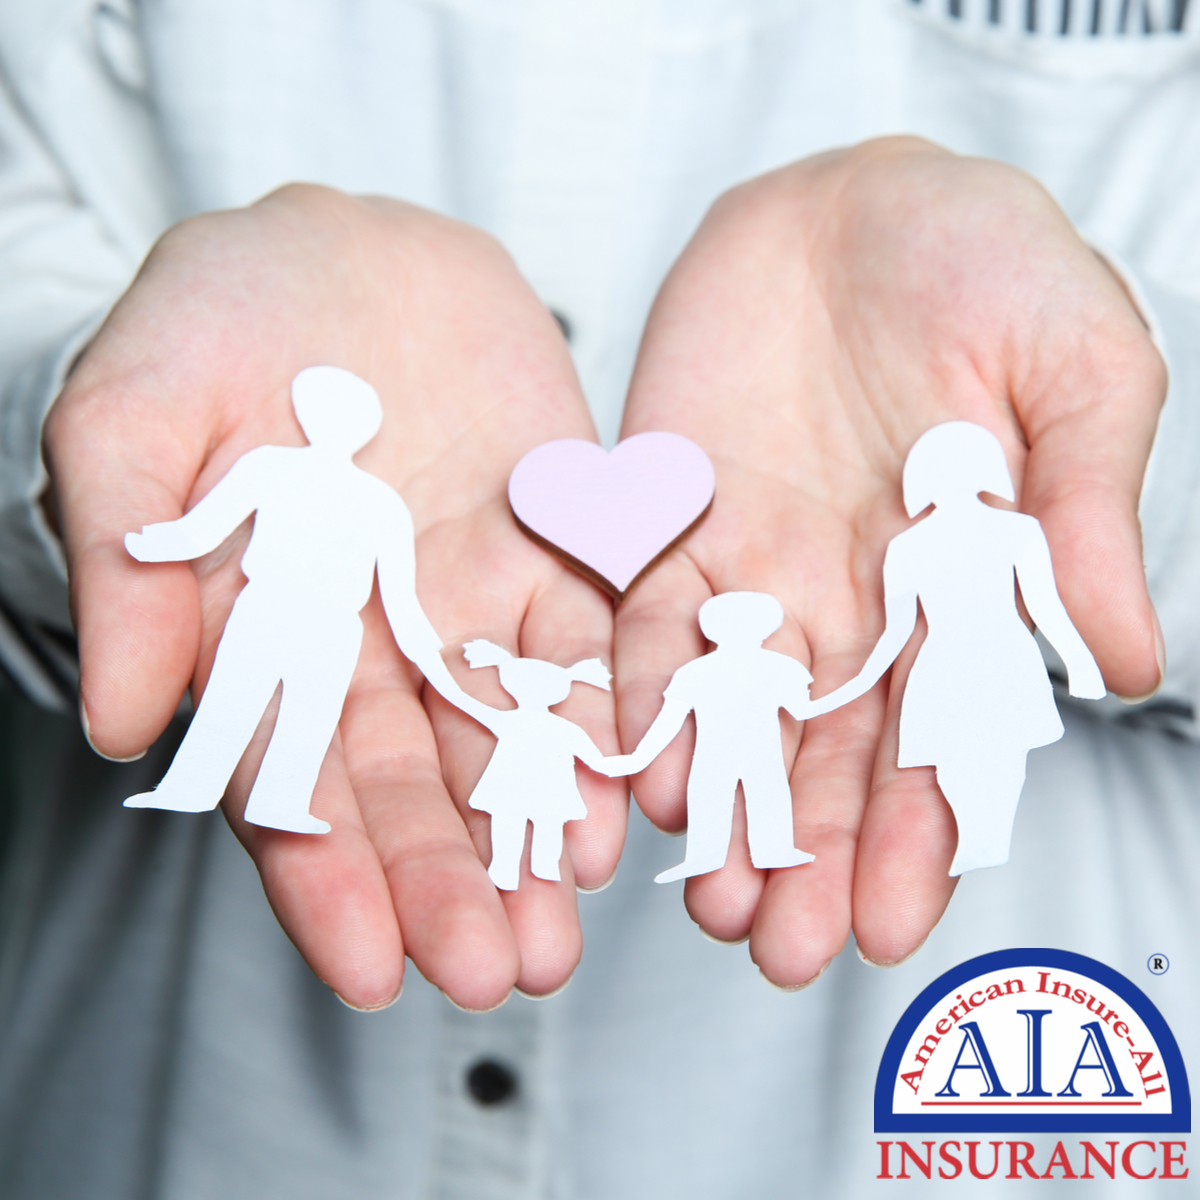 Call American Insure-All® for Important Information on Permanent Life Insurance Plans!